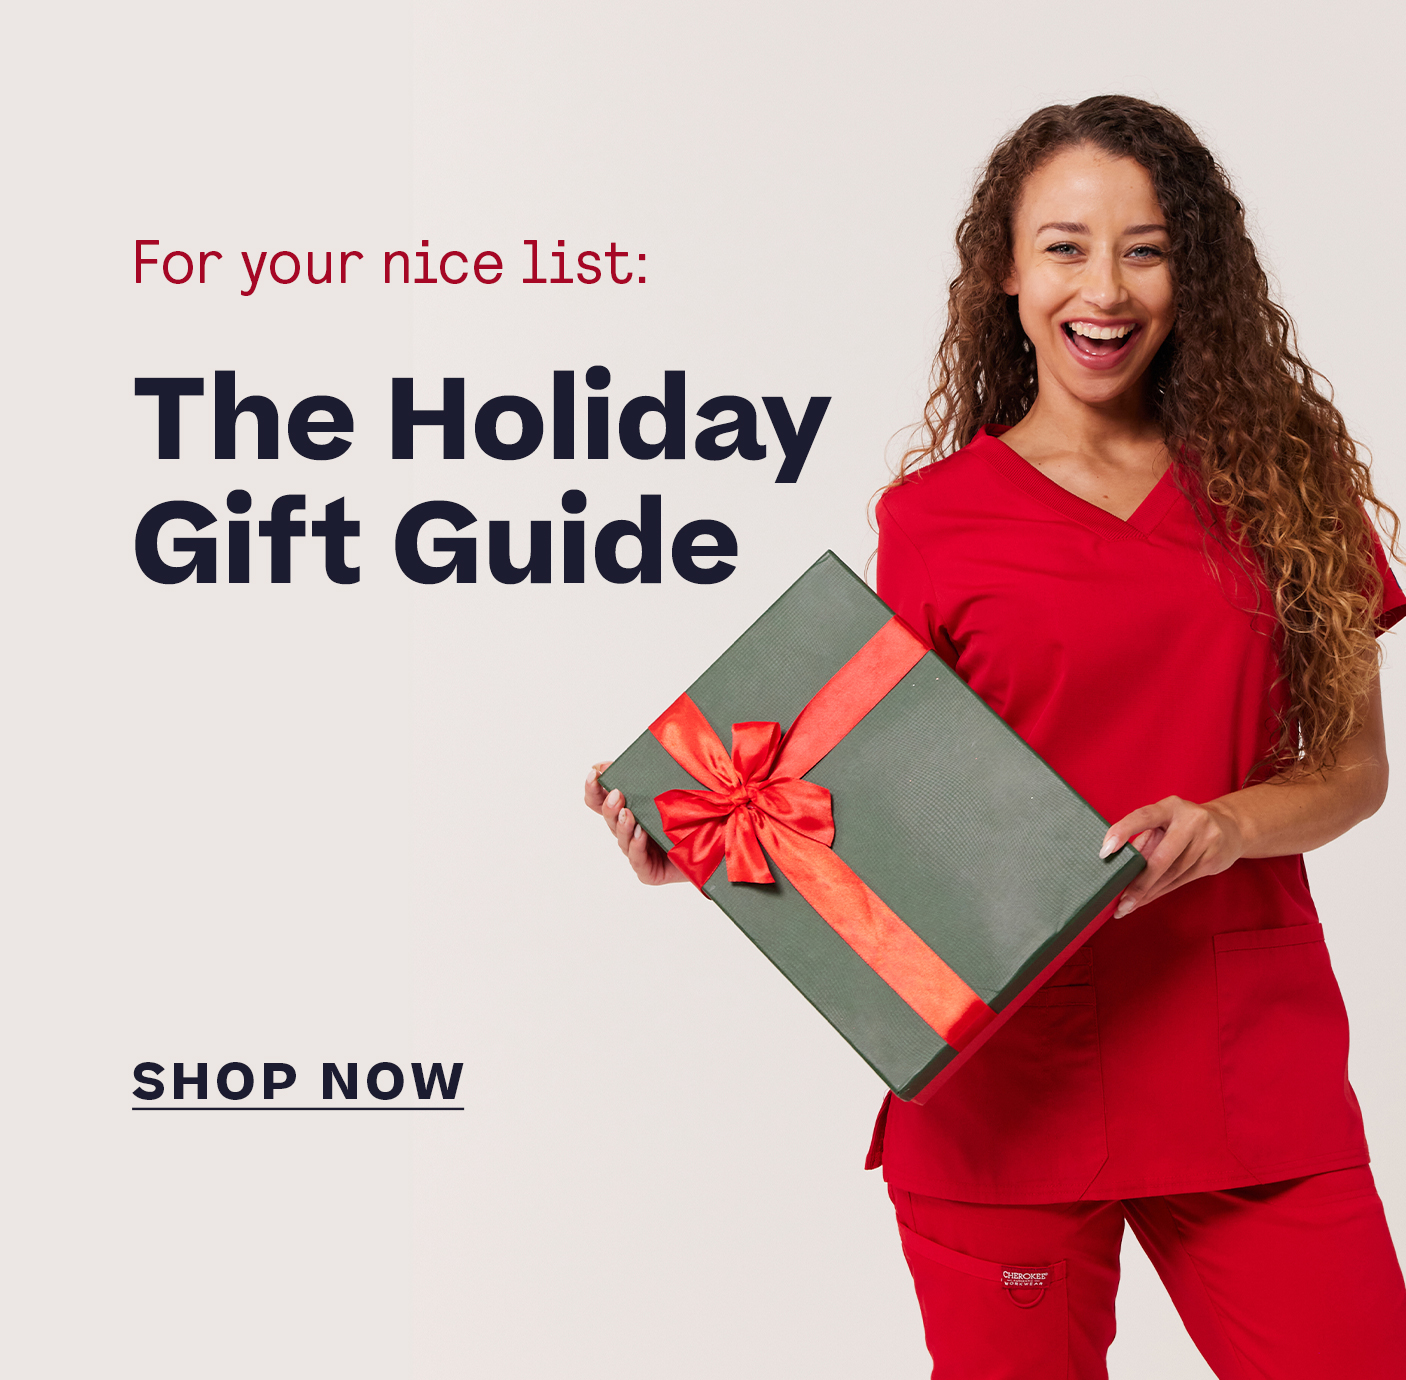 For your nice list: See the Holiday Gift Guide Shop Now